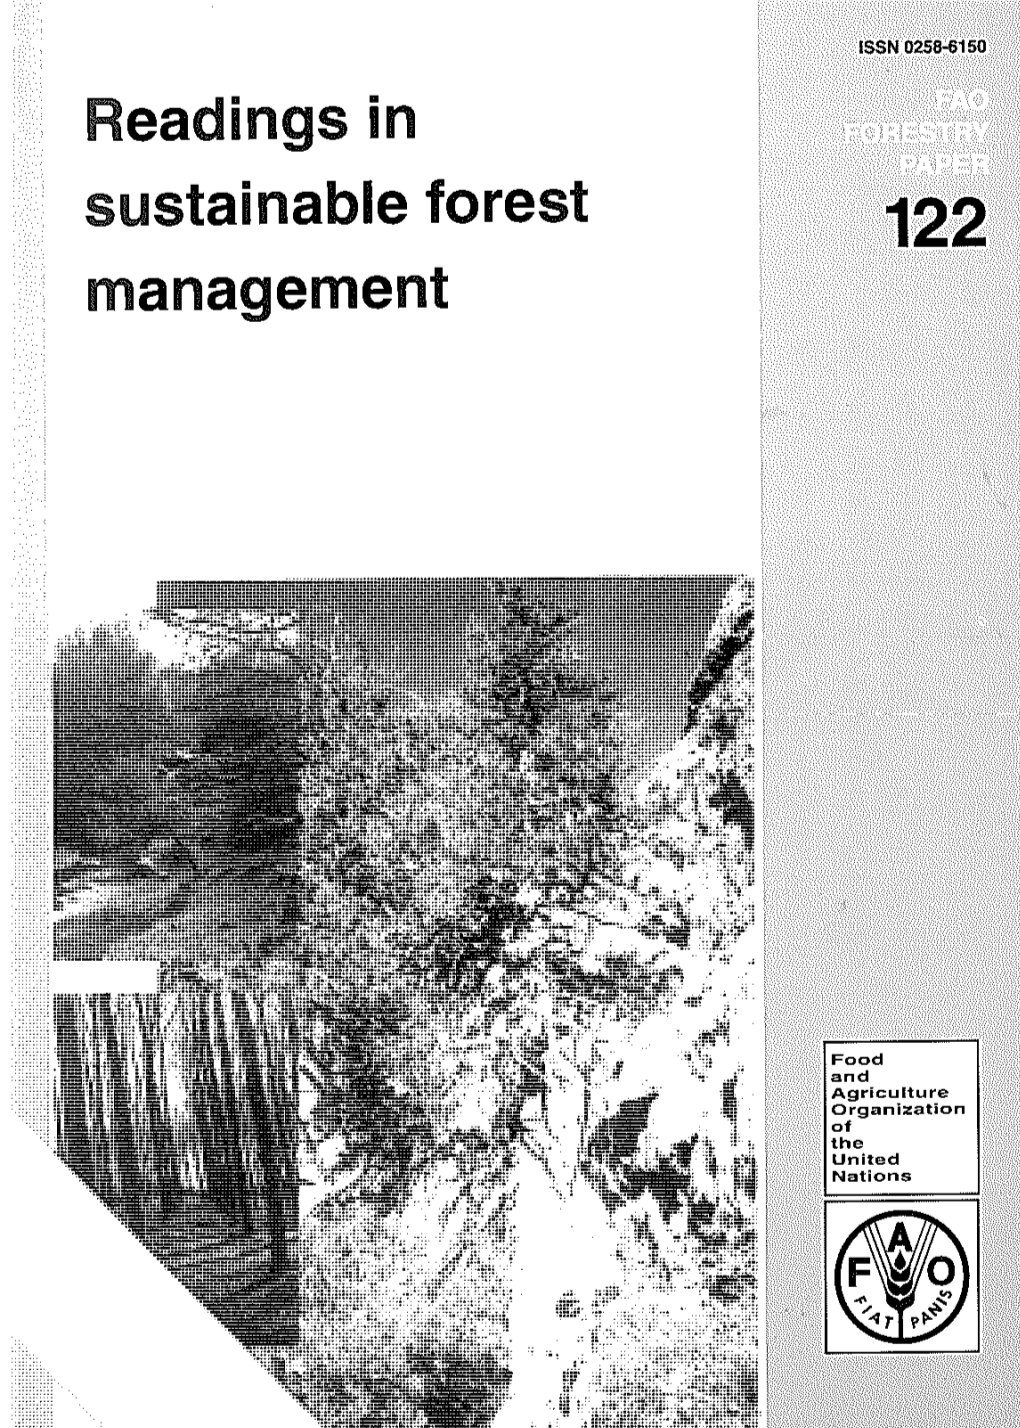 Readings in Sustainable Forest Management